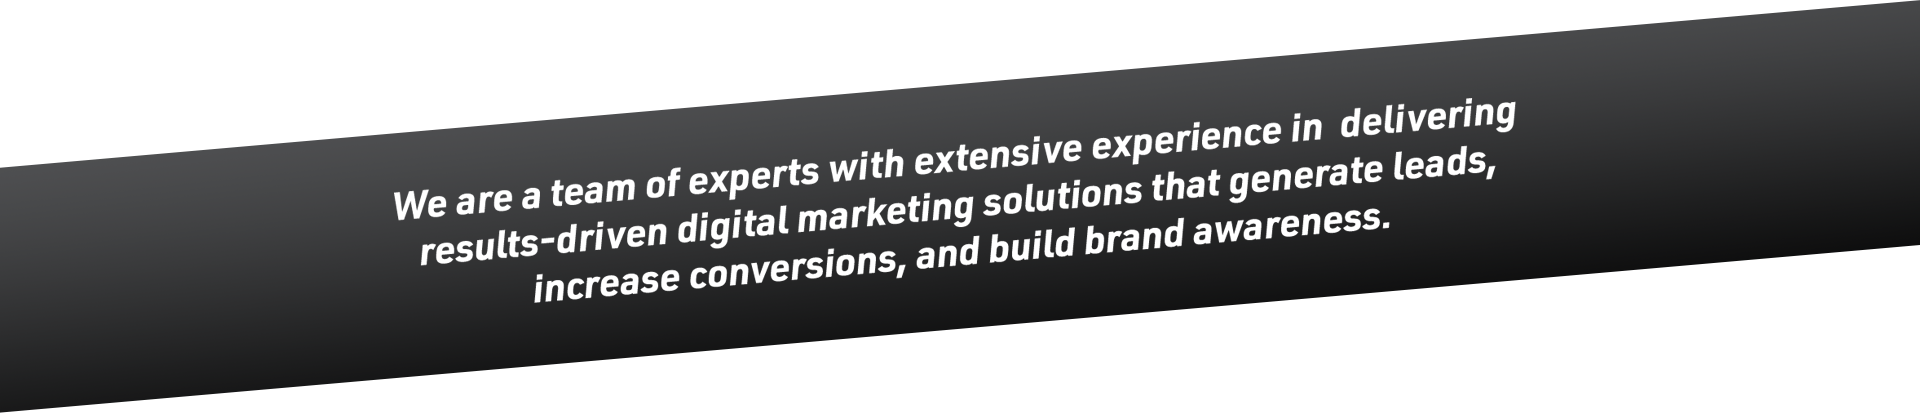 We are a team of experts with extensive experience in delivering result driven digital marketing solutions that generate leads, increase conversions, and build brand awerness/